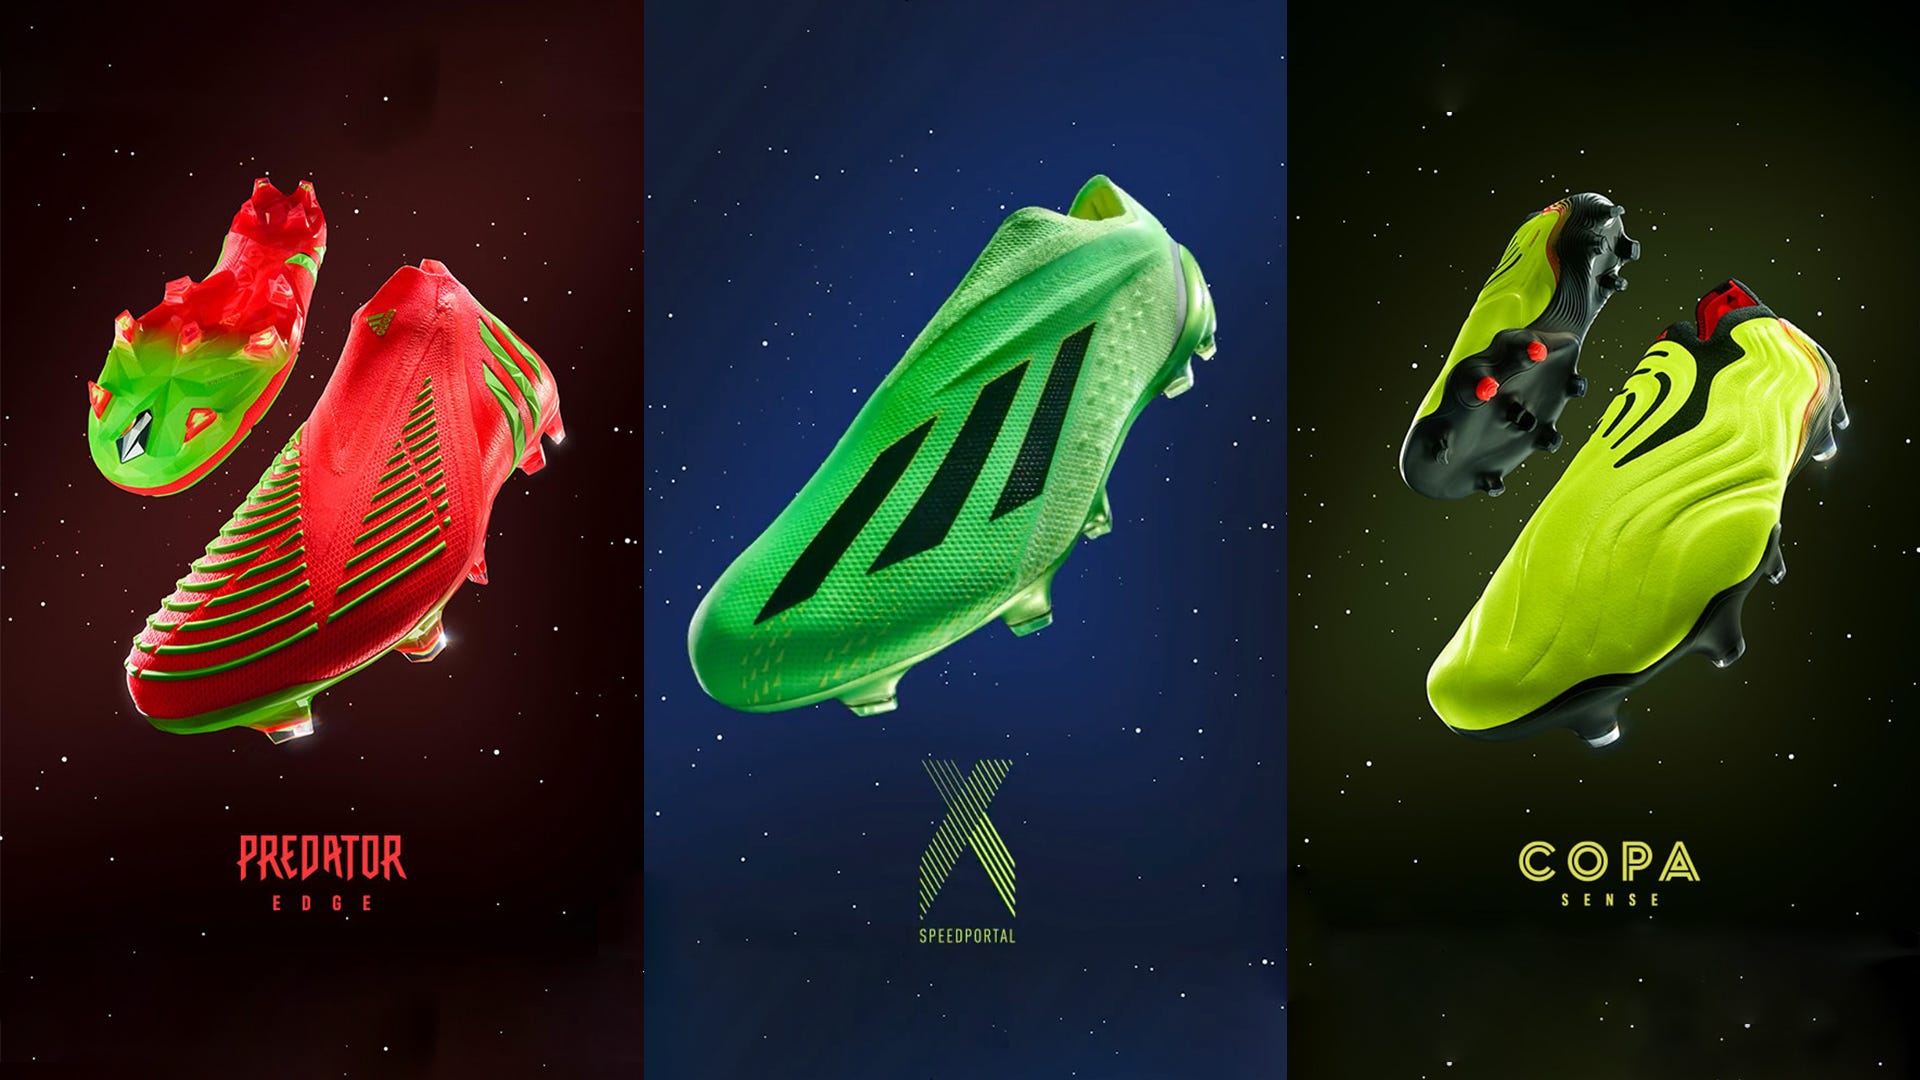 Petitioner friendship Auckland adidas launch vibrant Game Data football boots pack | Goal.com US